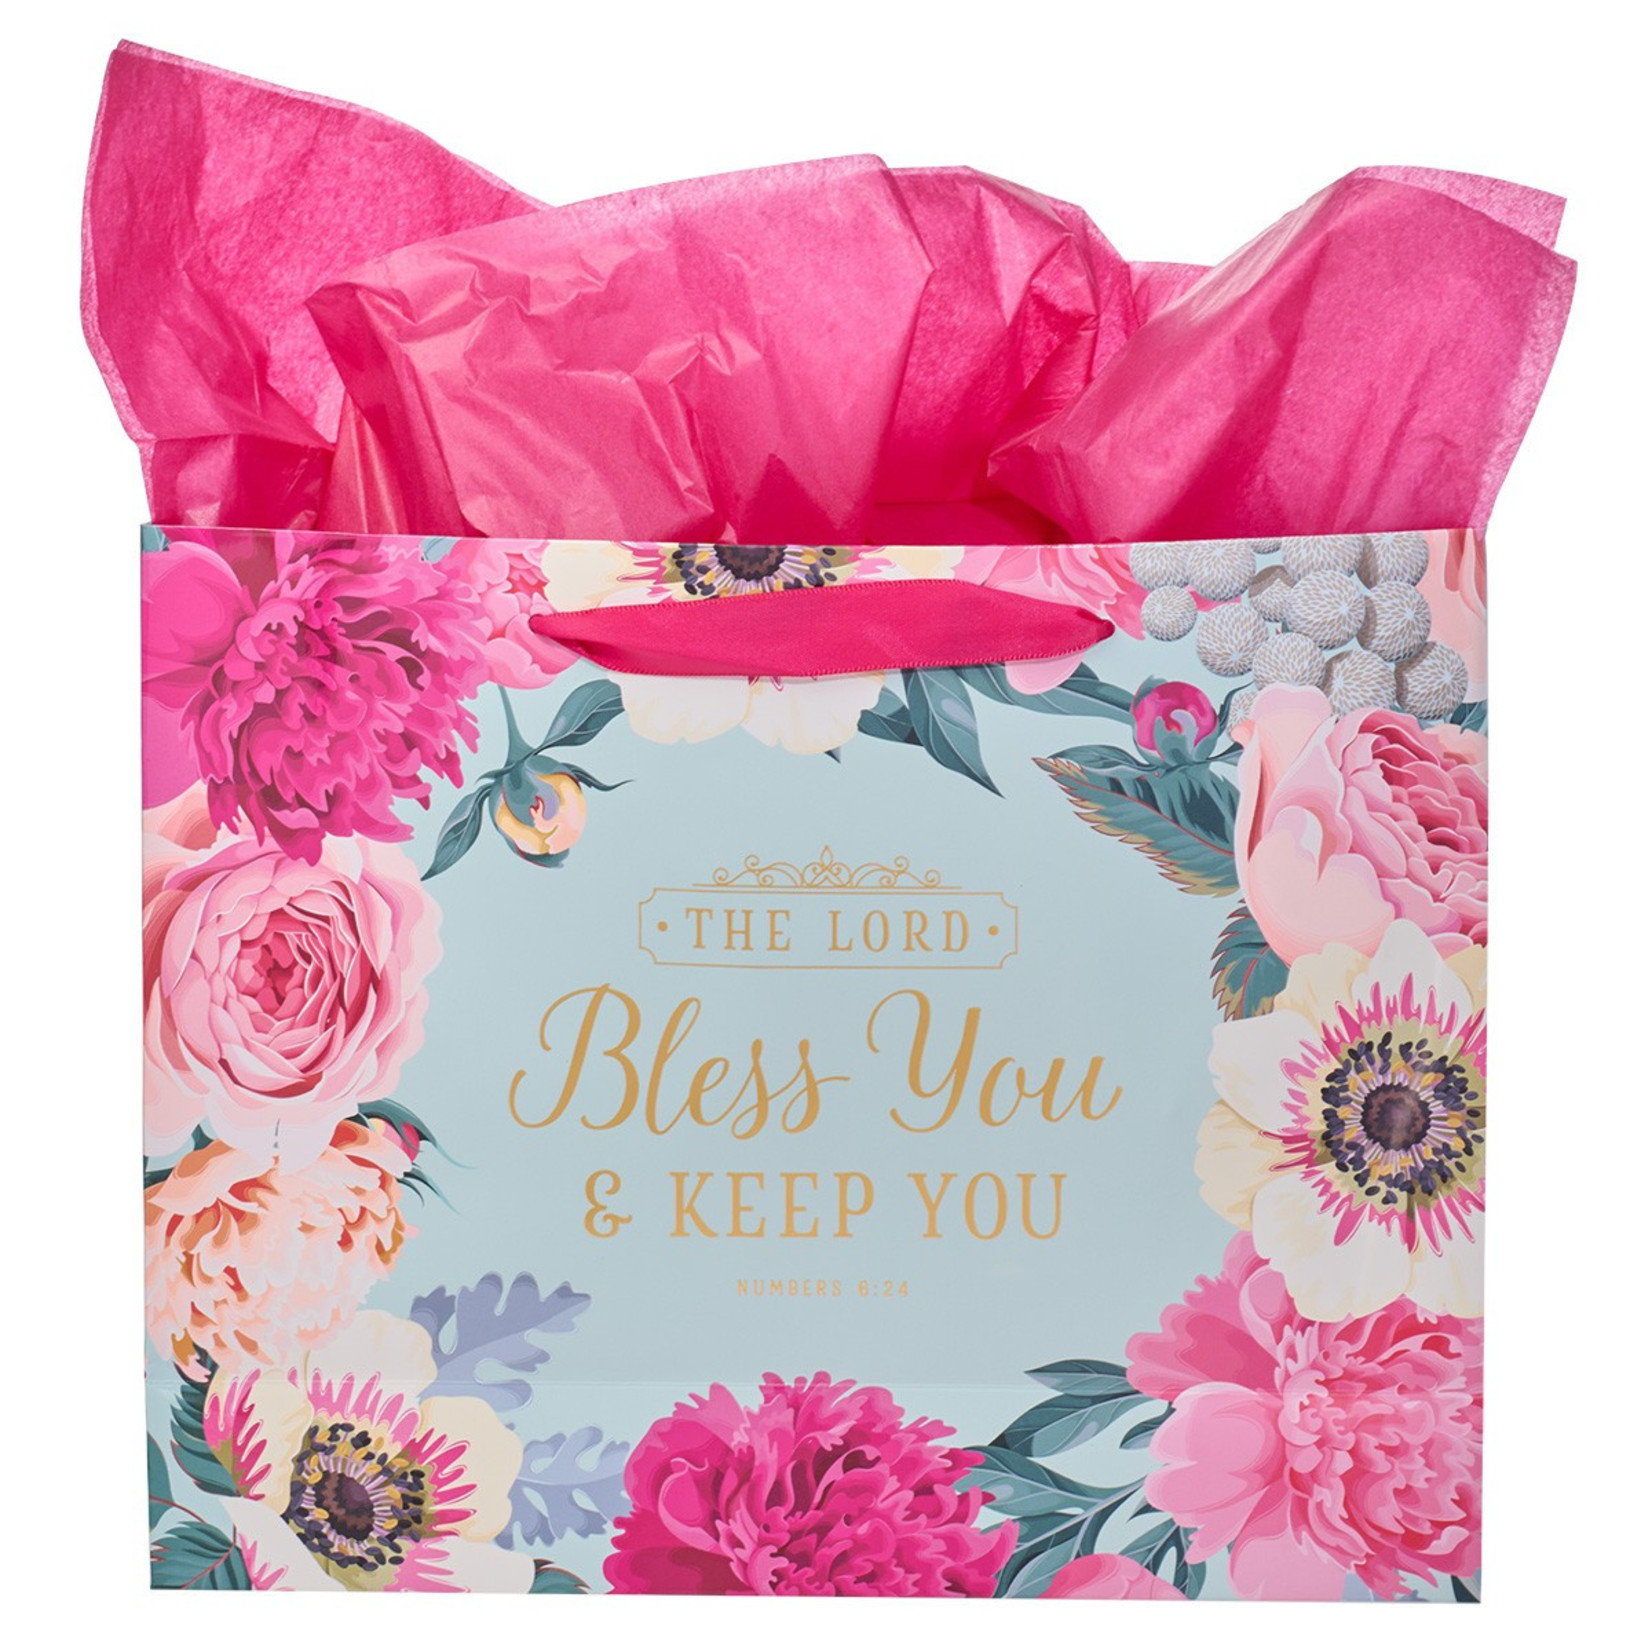 Christian Art Gifts Bless You & Keep You Pink Floral Large Landscape Gift Bag with Card - Numbers 6:24